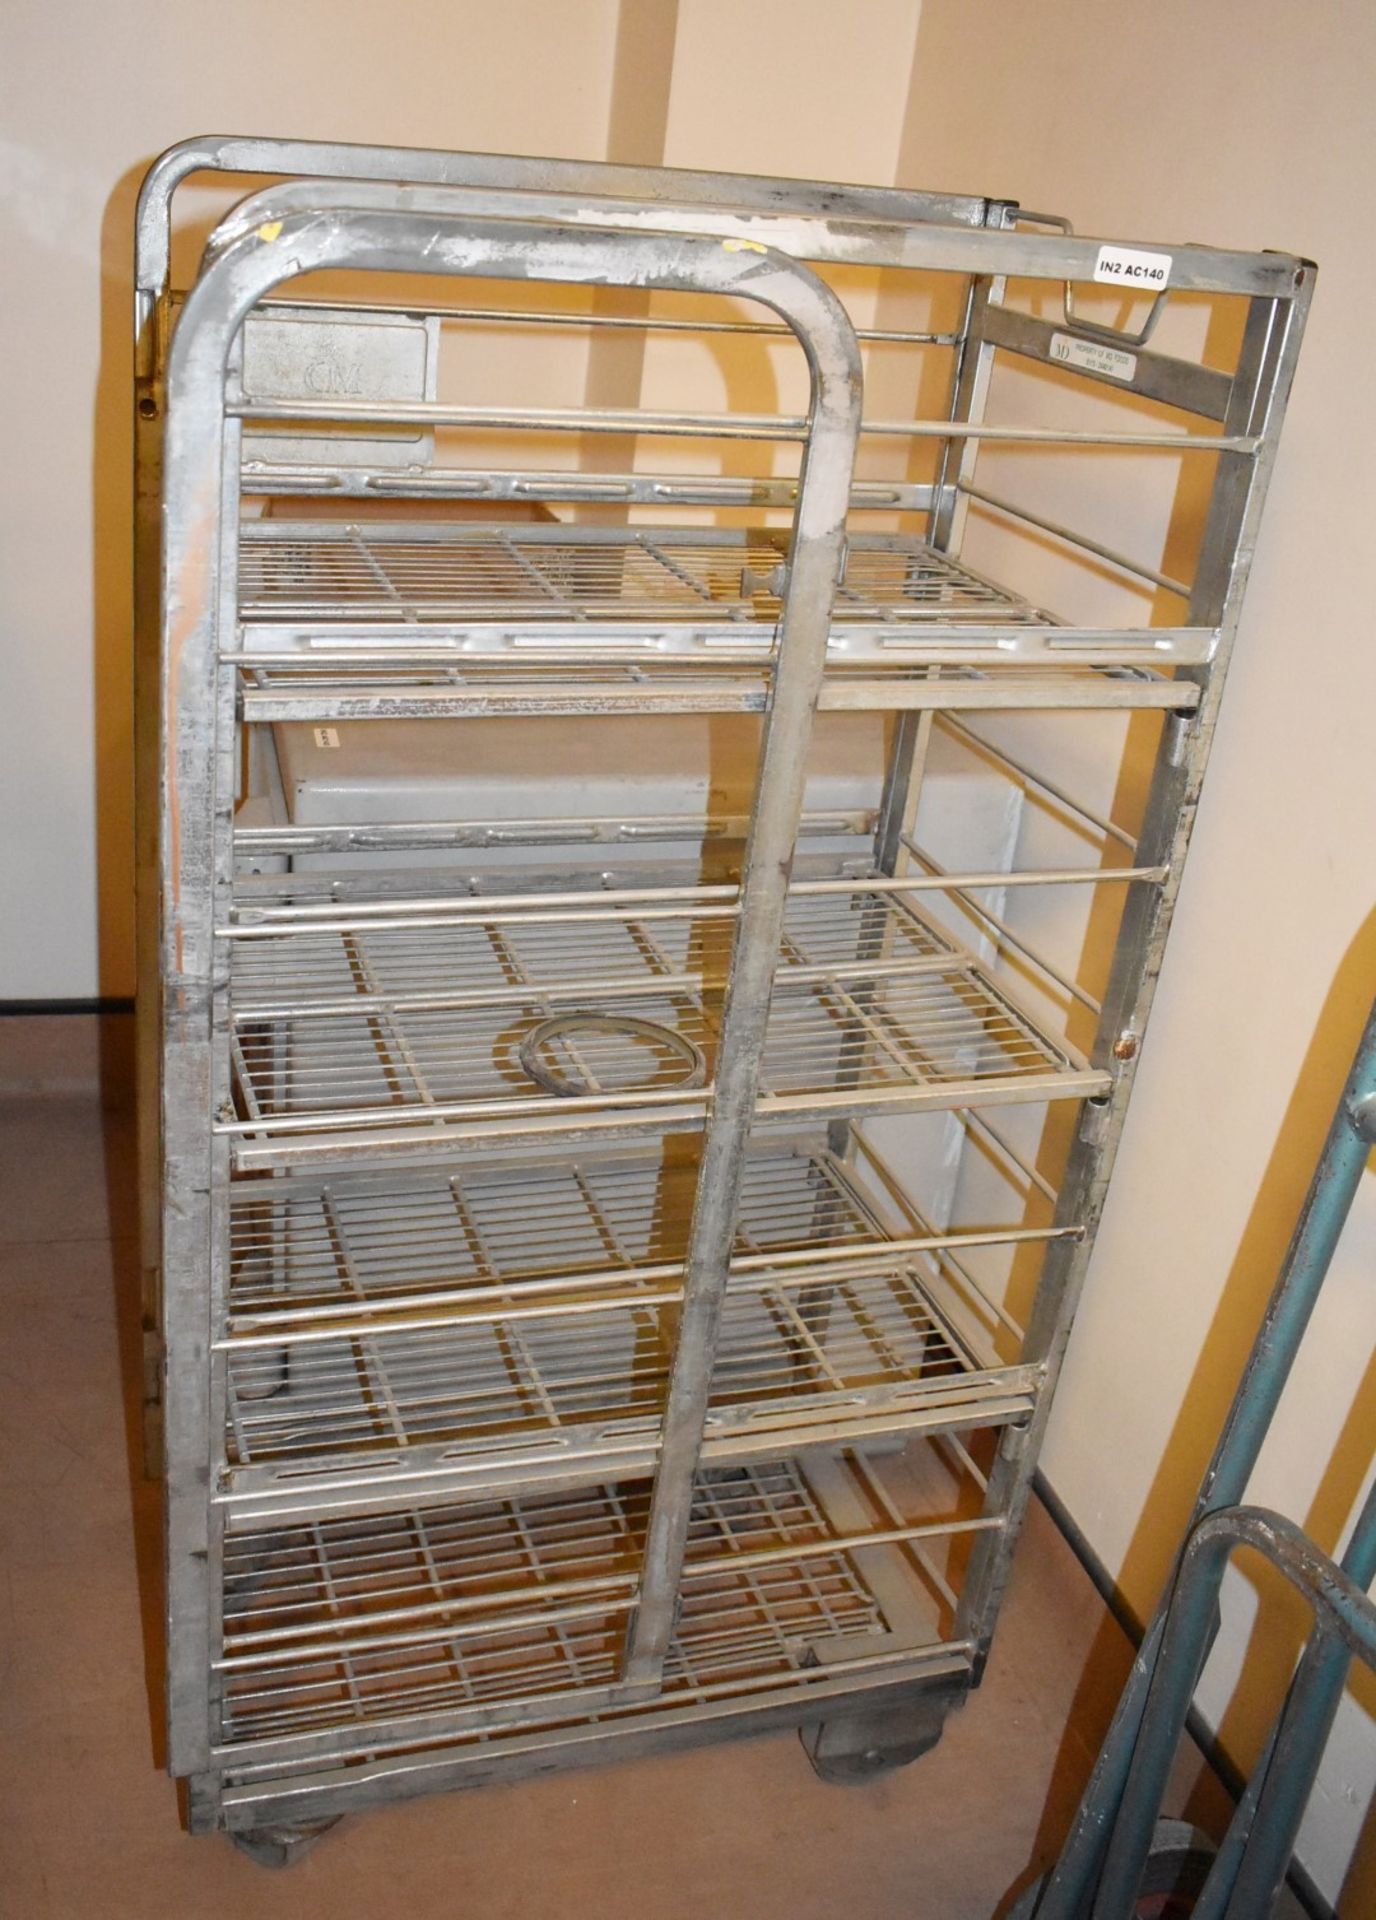 2 x Metal Milk Cage Trolleys - Ref: AC140 GFBR - CL646 - Location: Manchester, M12 Collection - Image 2 of 4